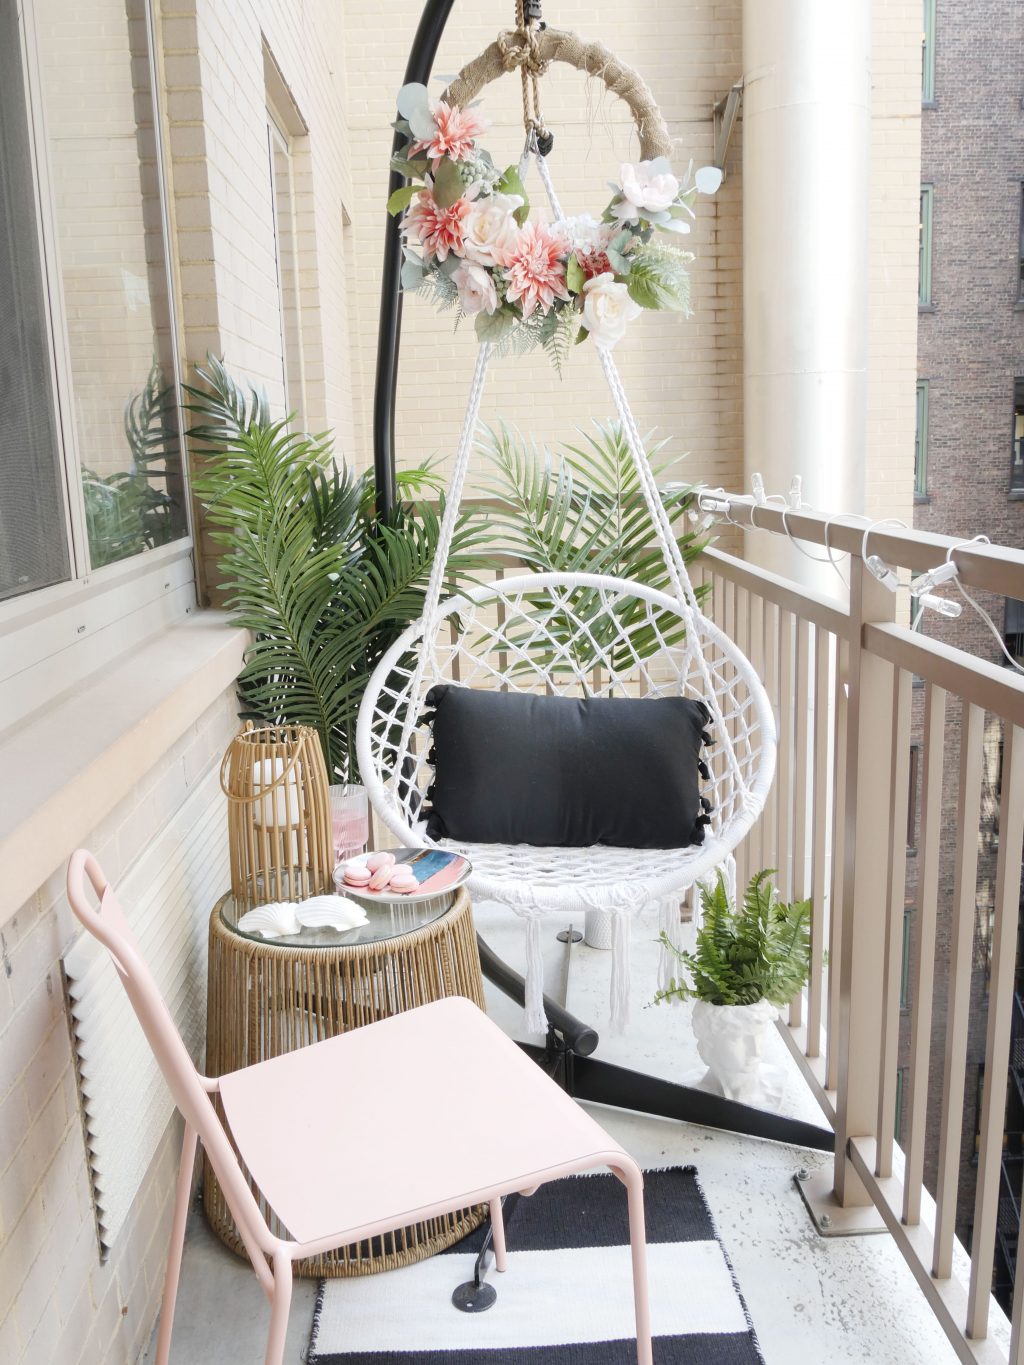 15 Decor Ideas for Small Outdoor Spaces